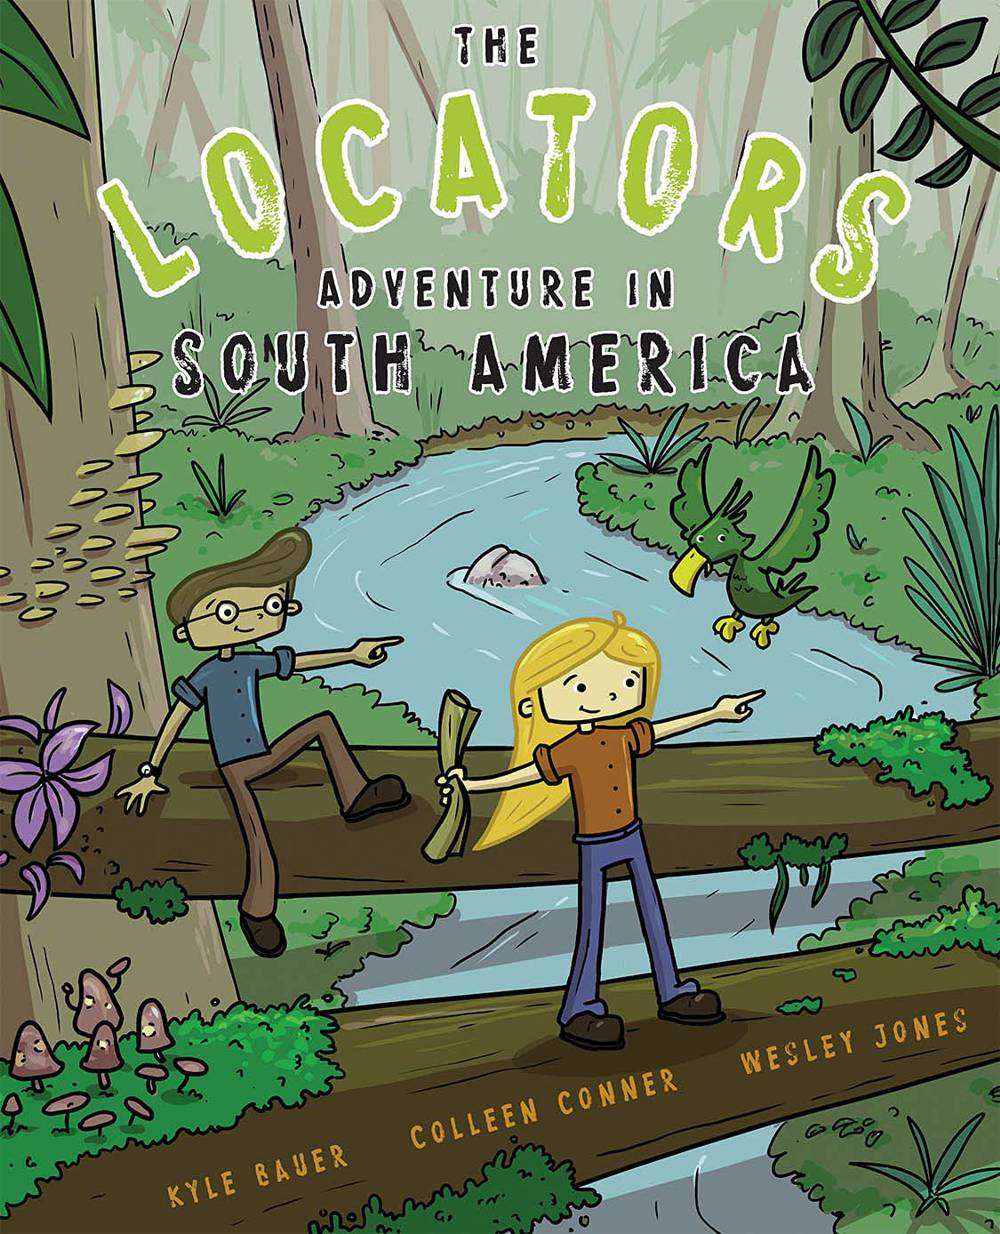 Esri's new book teaches Geographic Concepts through a South American Adventure